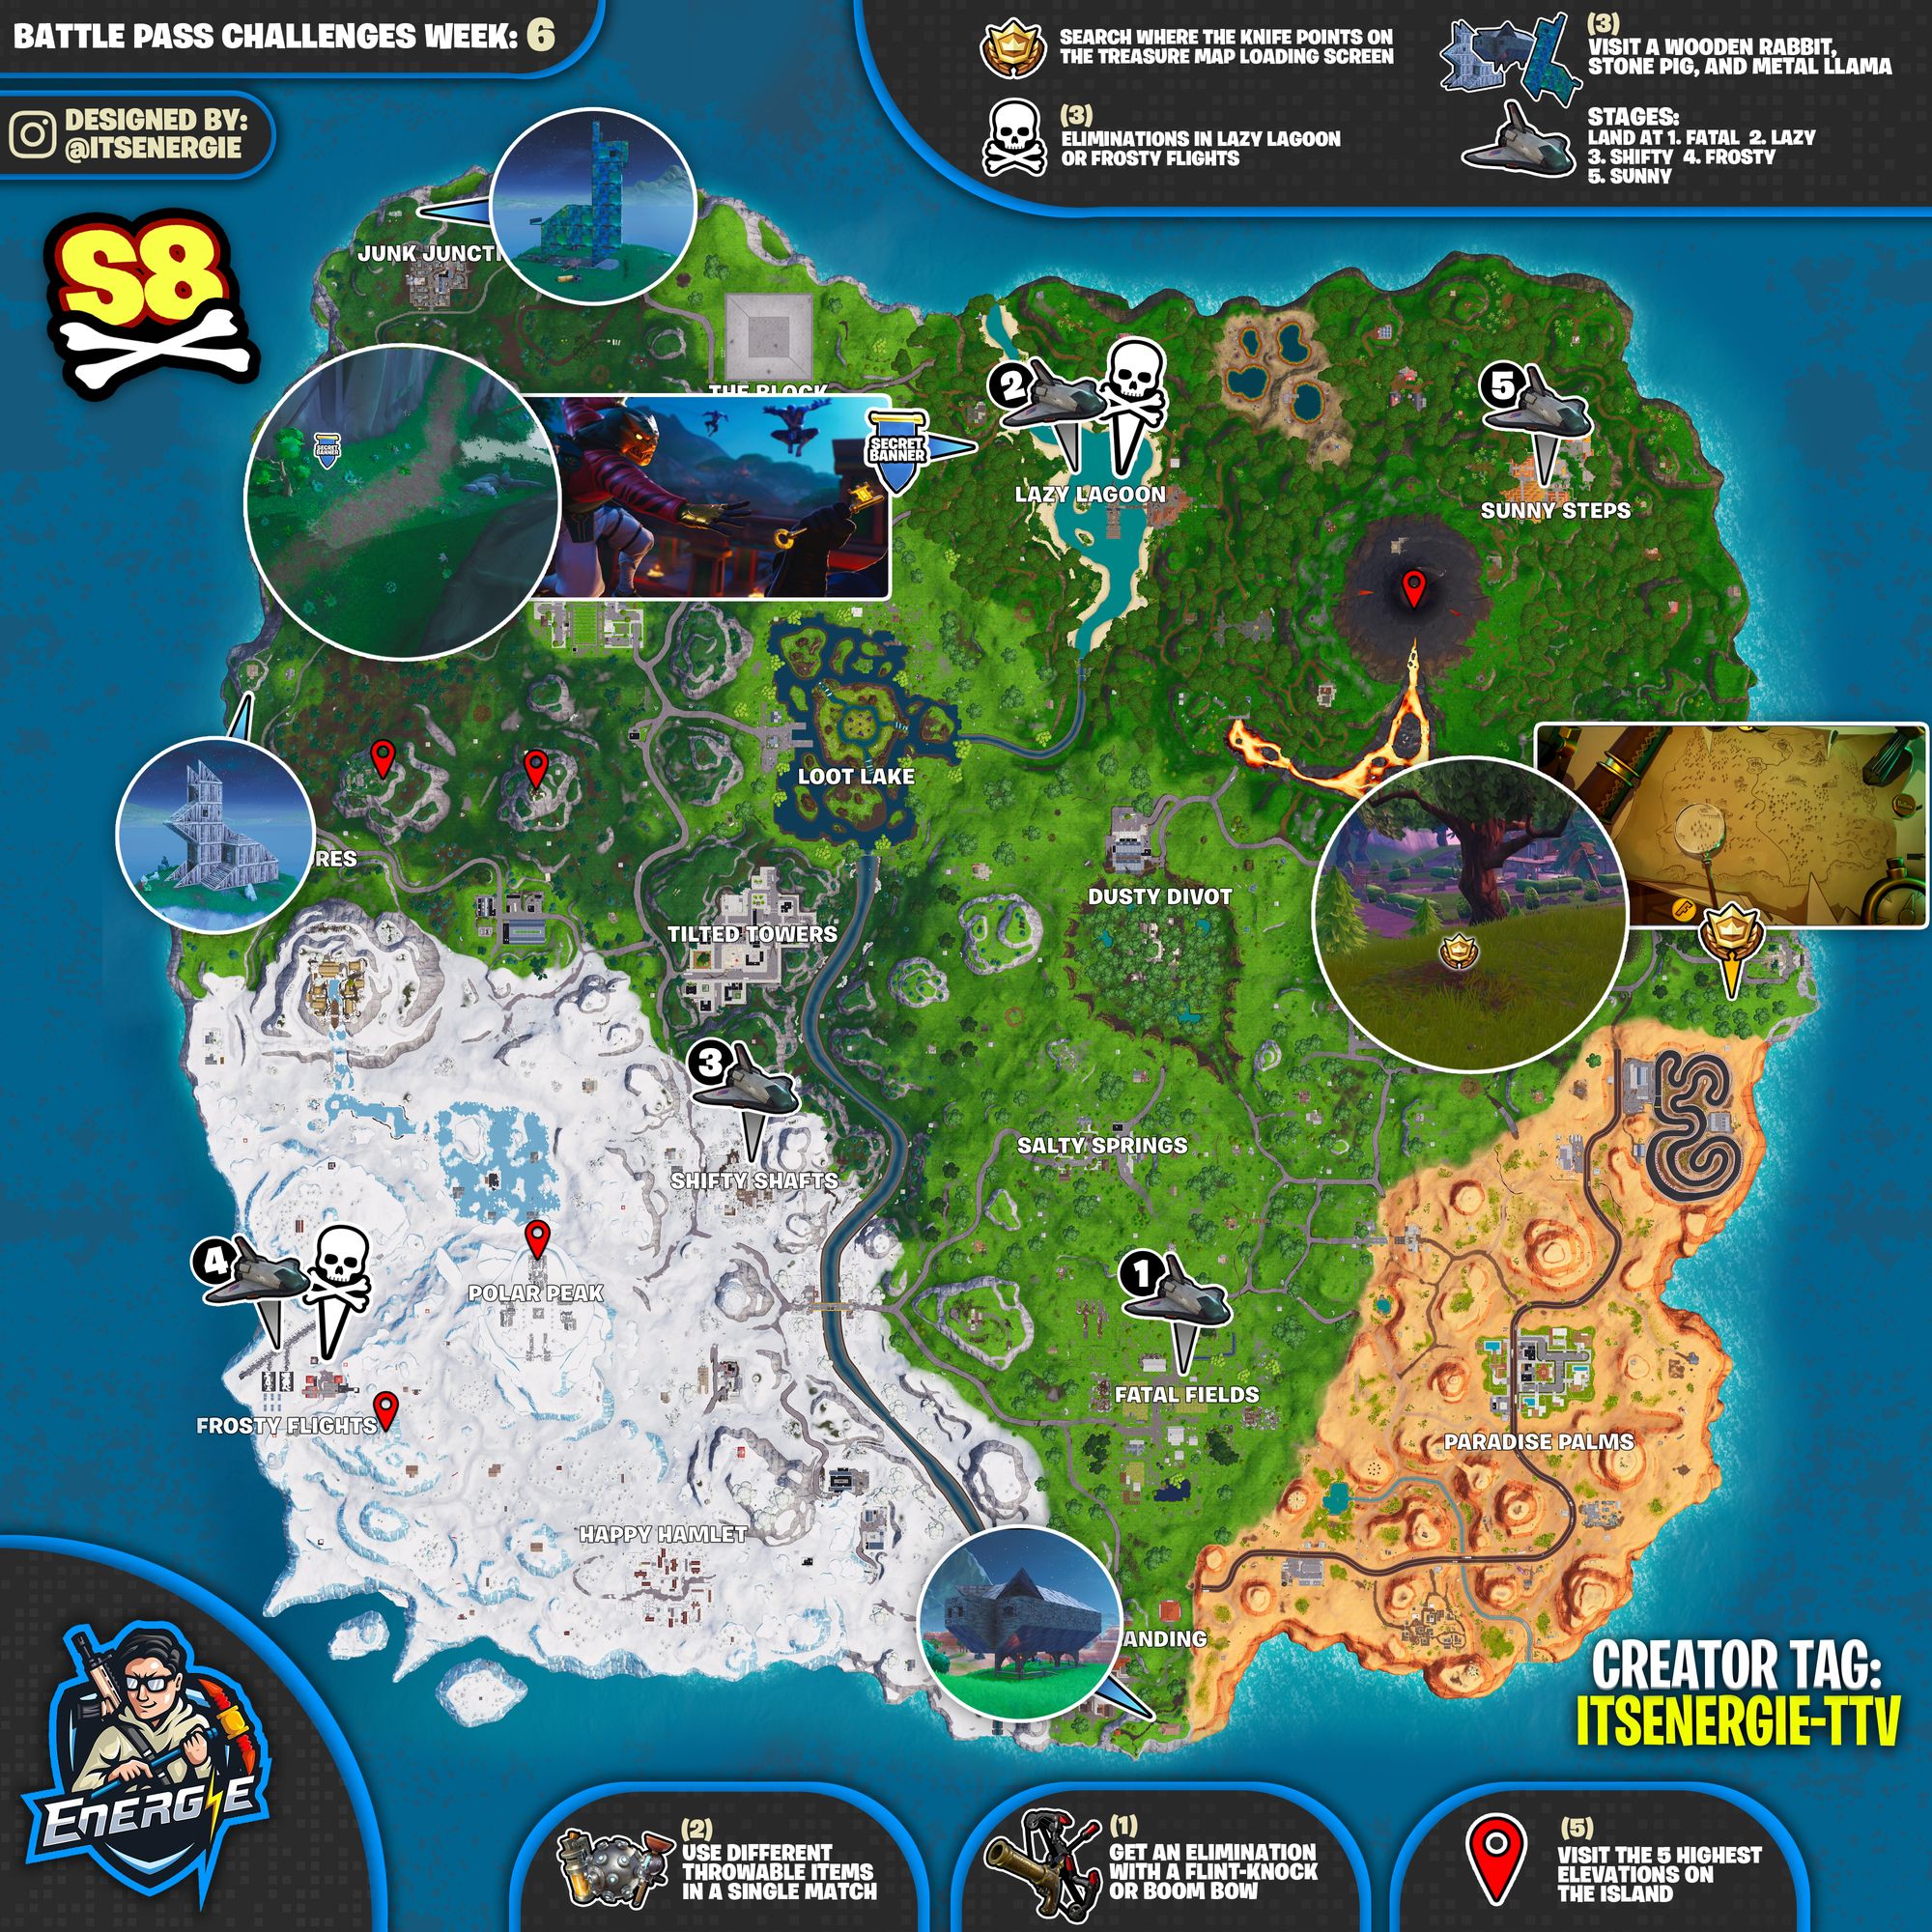 struggling with this week s challenges the cheat sheet mastermind itsenergie has put together another cheat sheet to make our lives a little bit easier - week 8 challenges fortnite cheat